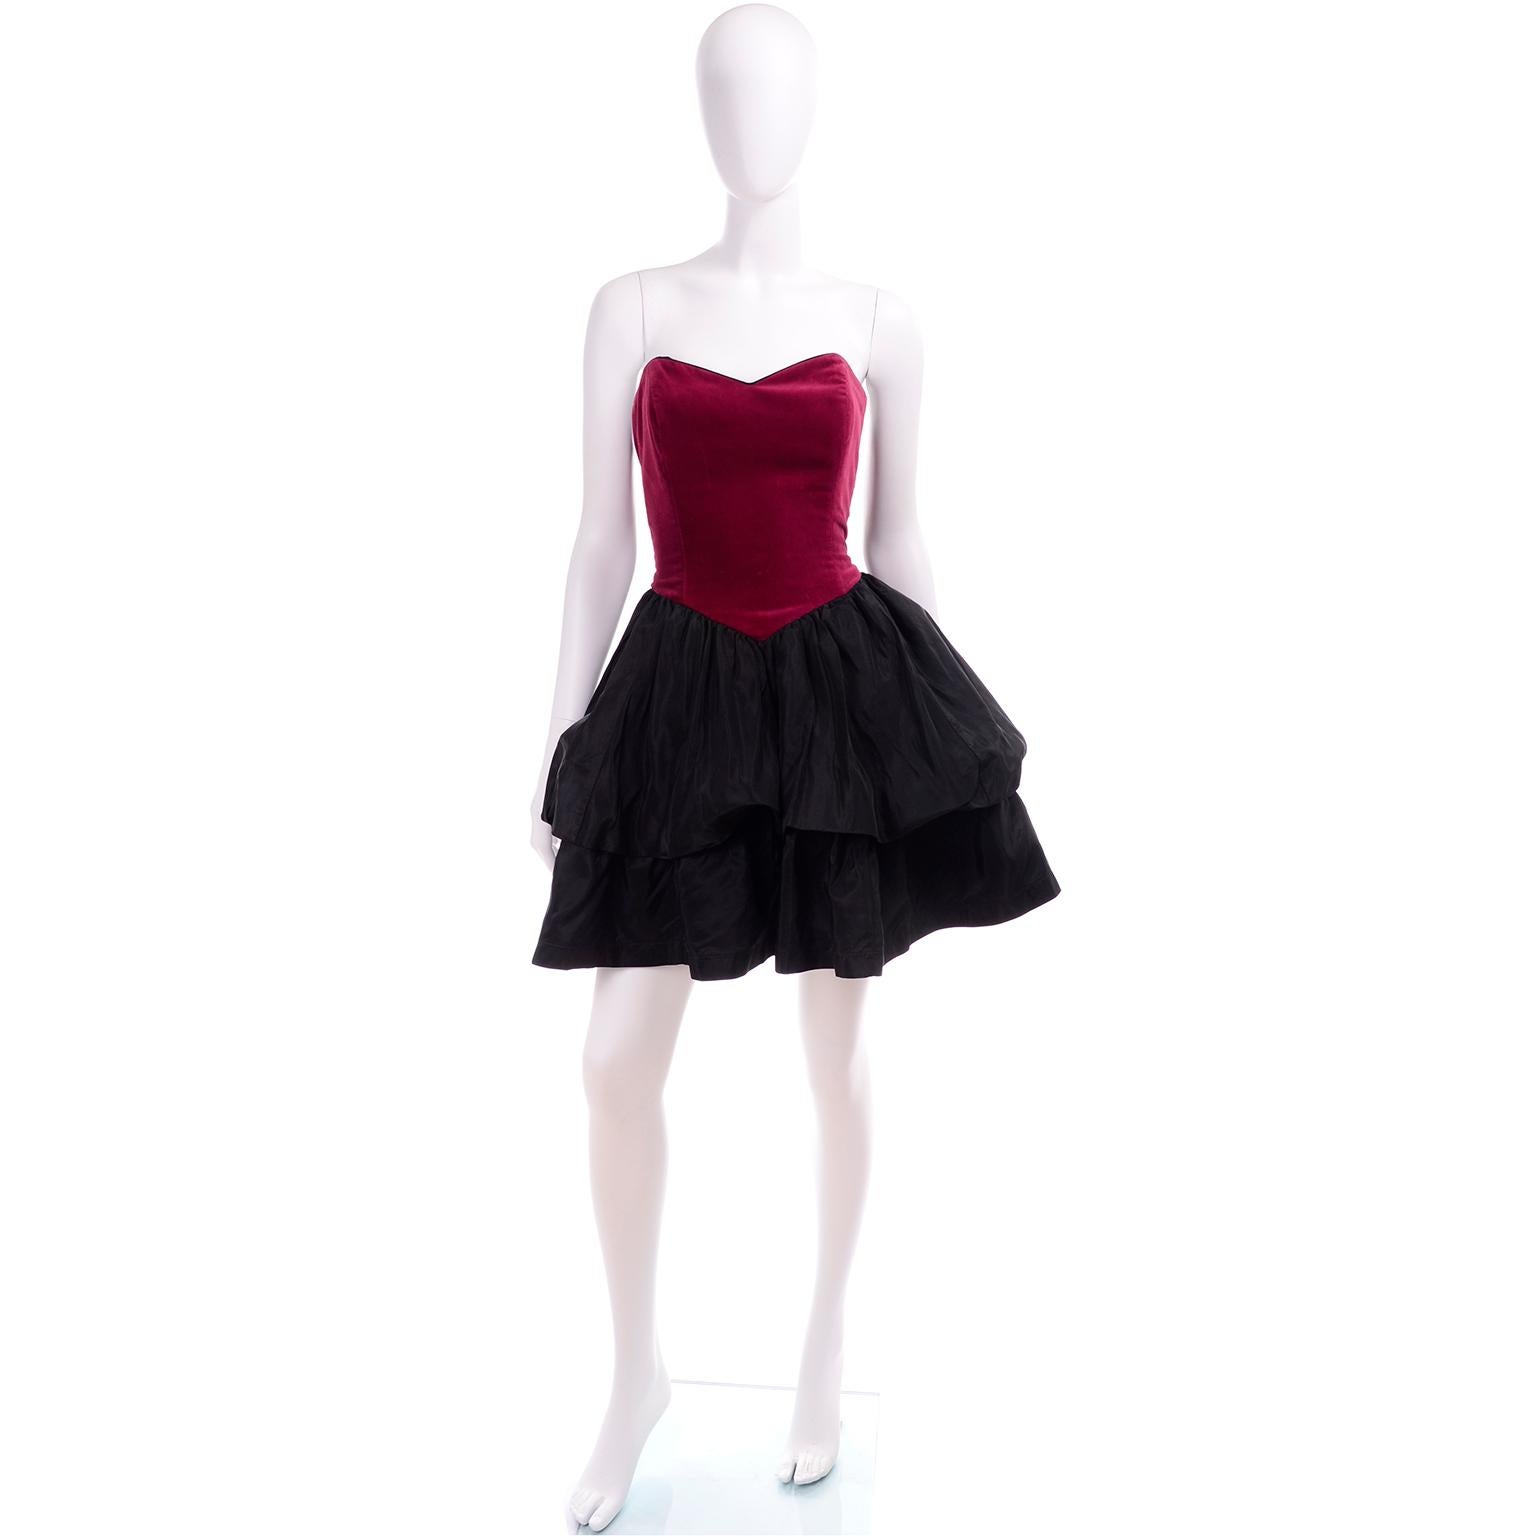 This vintage Laura Ashley dress would make a perfect holiday party dress!  The dress has a raspberry red velvet bustier style bodice with boning for structure. The full skirt is black taffeta with a tiered bubble effect. The dress closes in the back